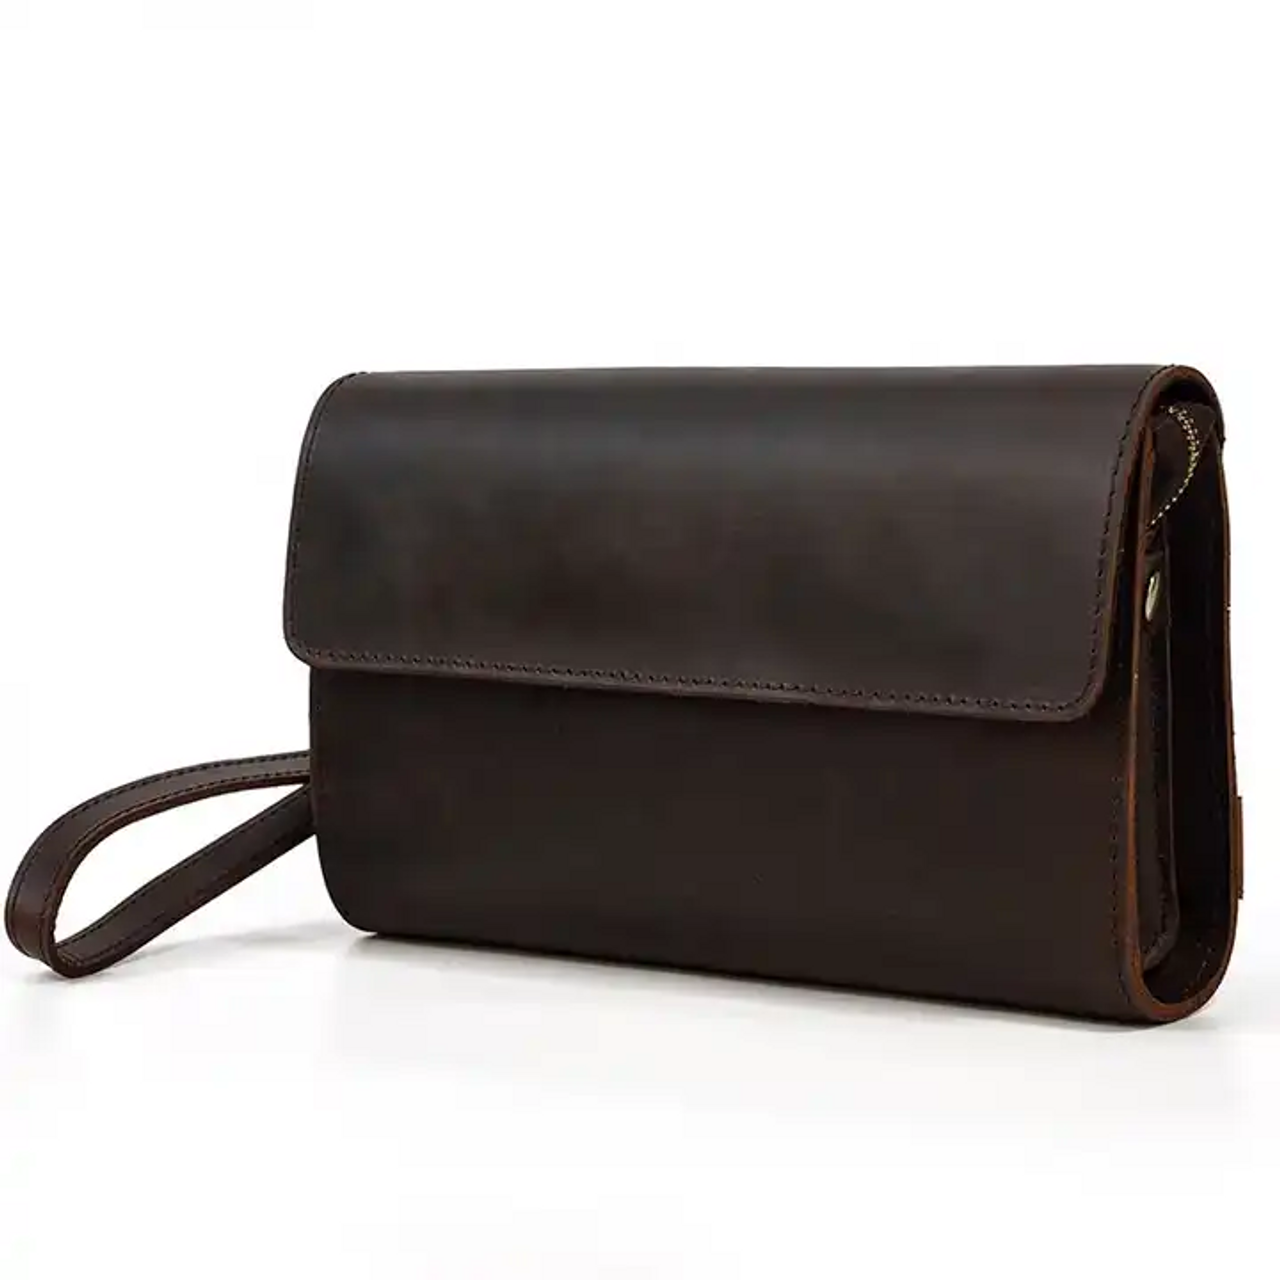 Crazy Horse Leather Luxury Clutch Bag